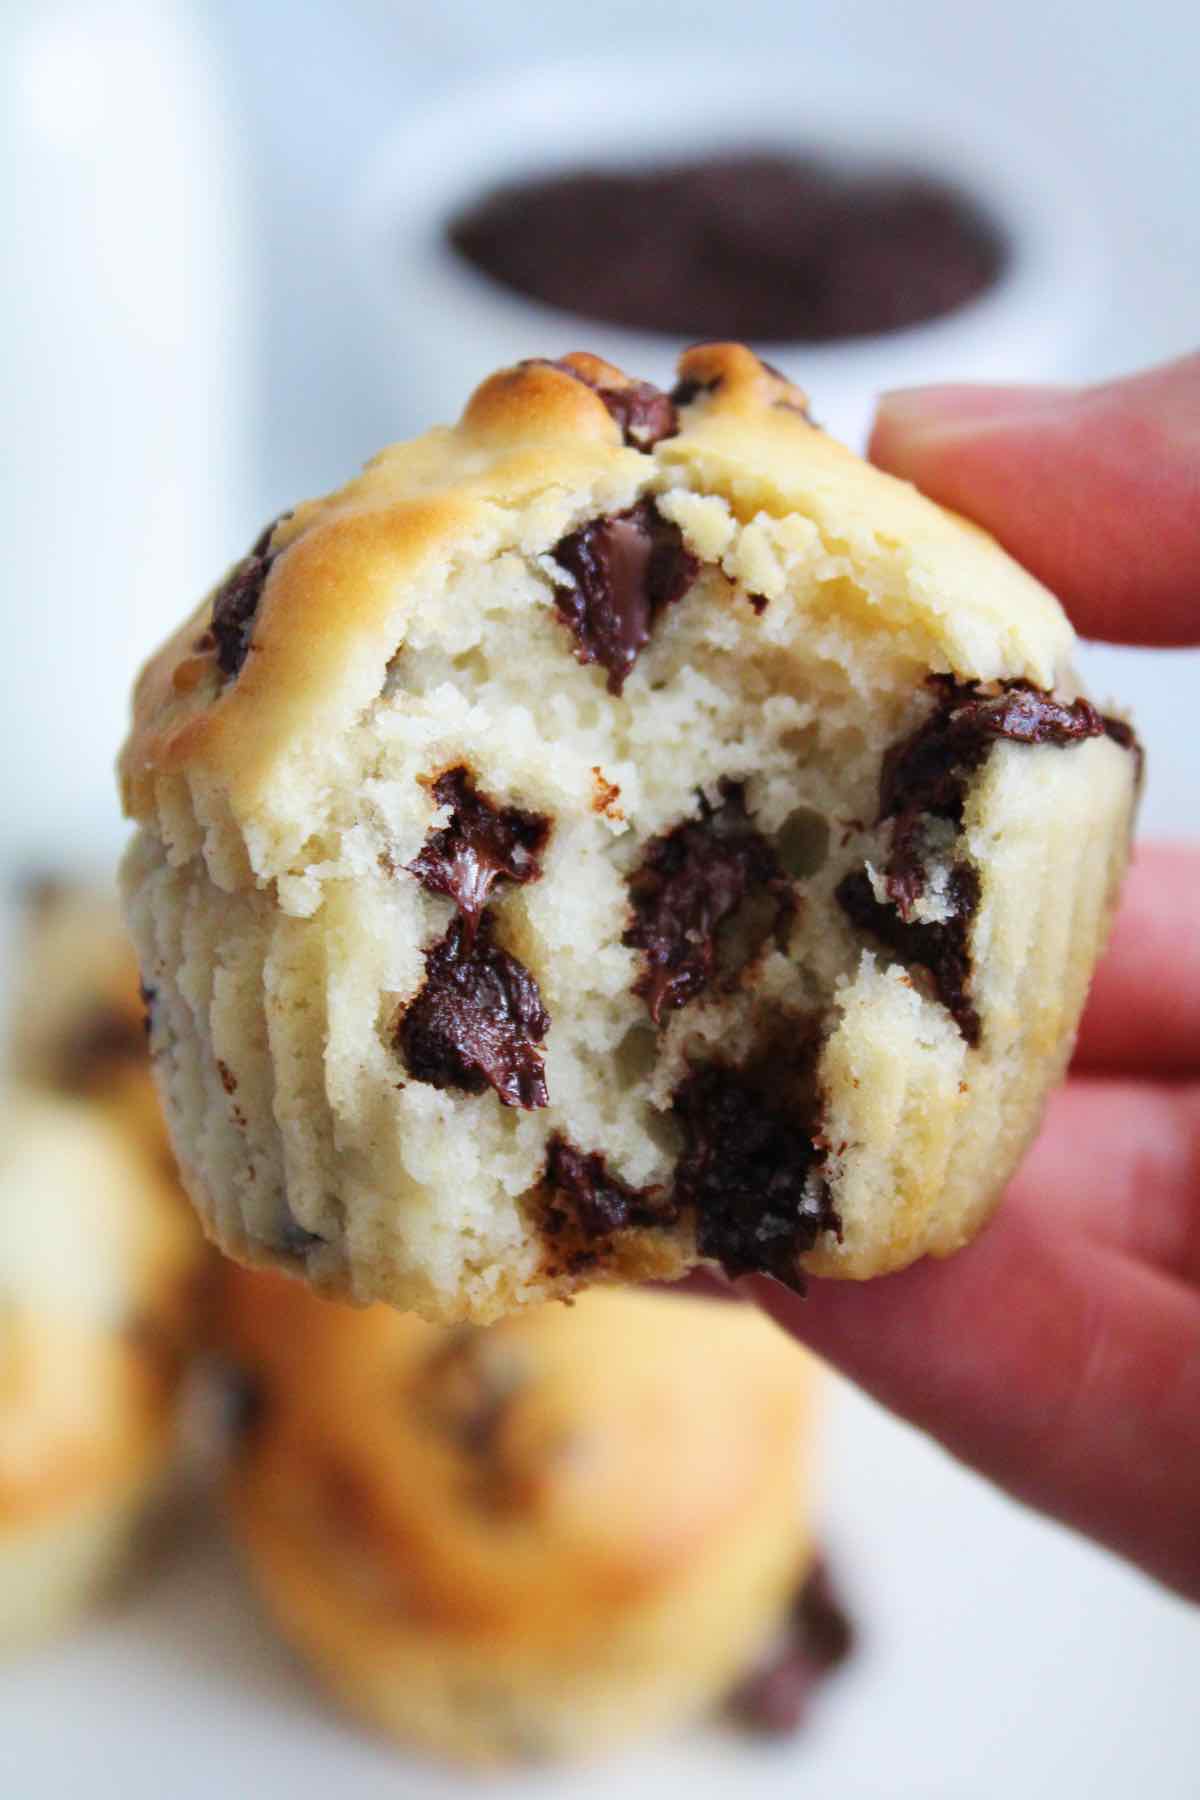 These chocolate chip muffins were air fried.